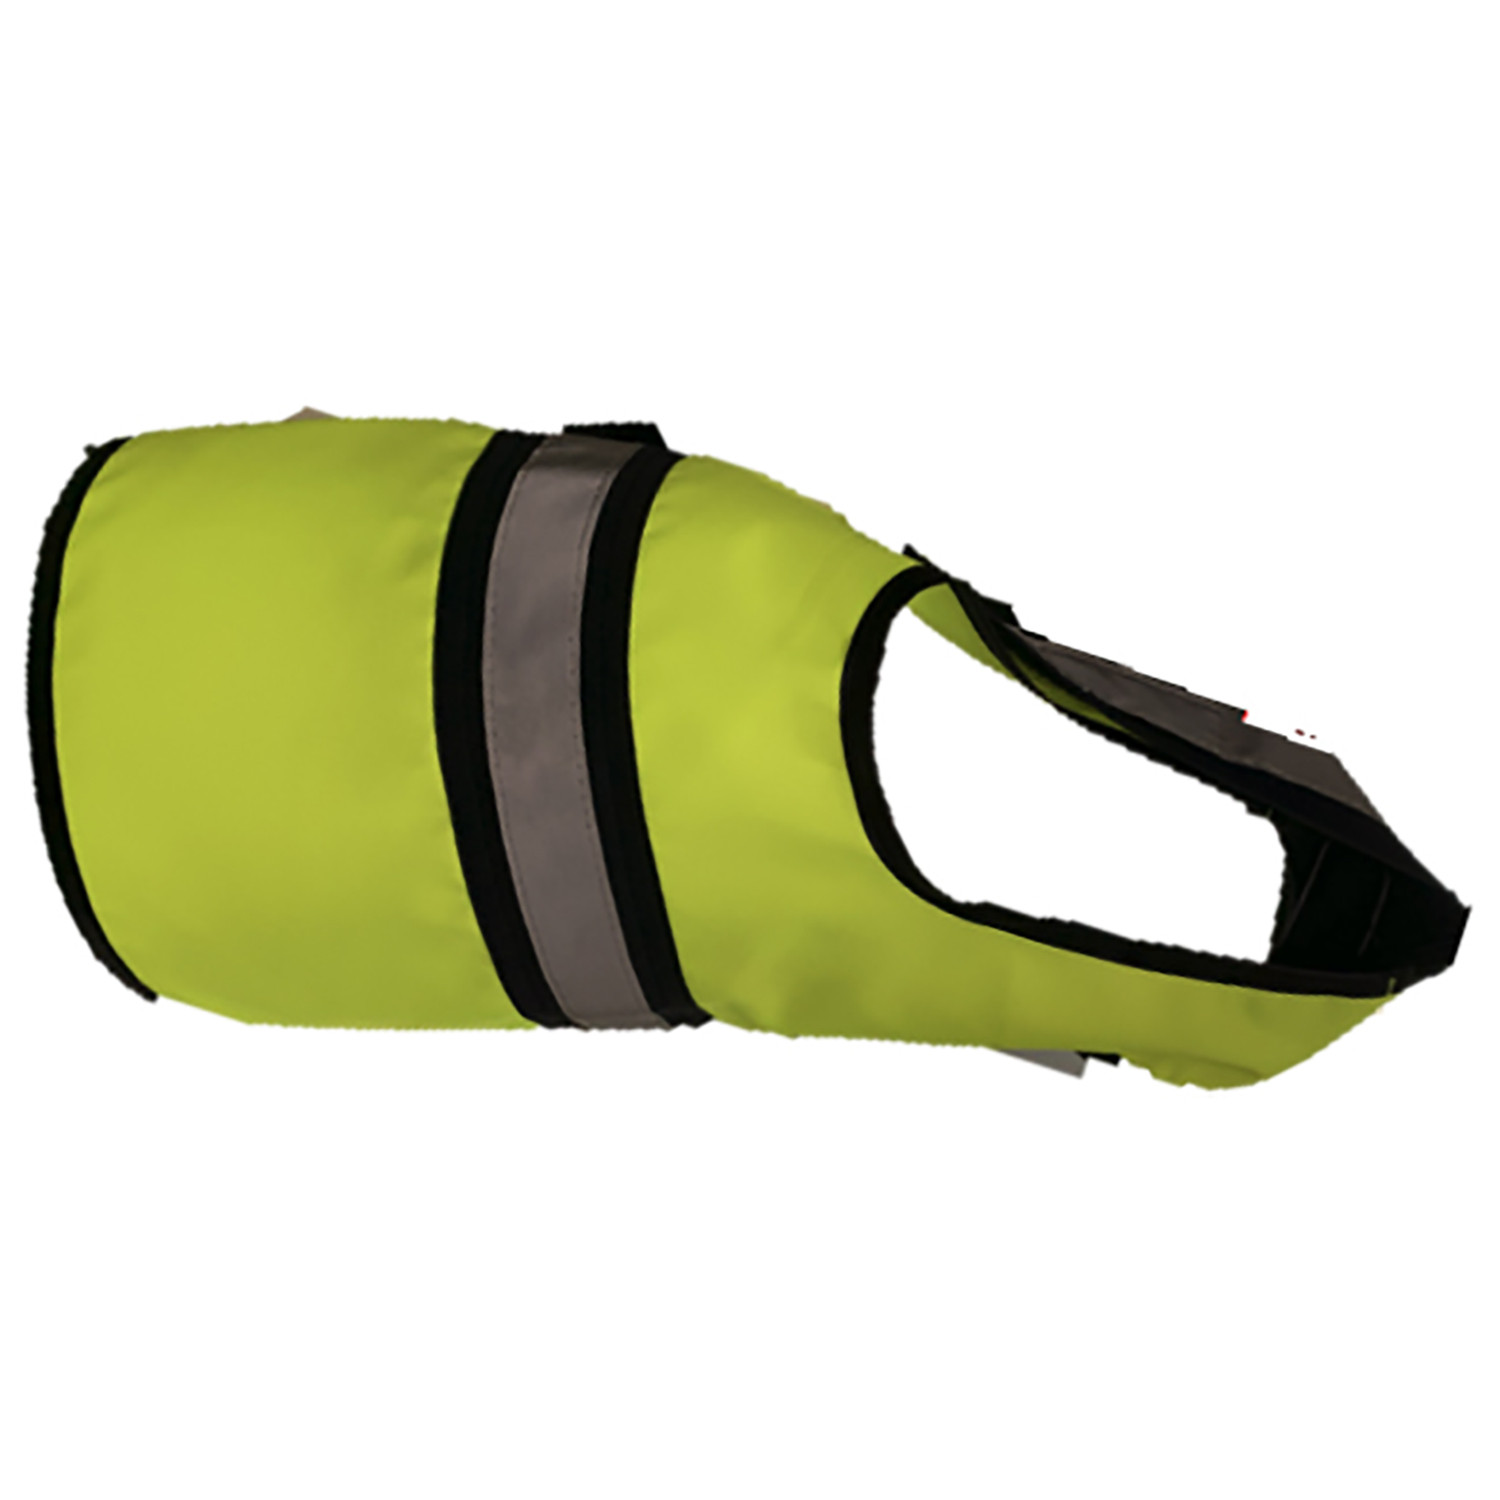 Lightweight High Visibility Gilet - M Image 1